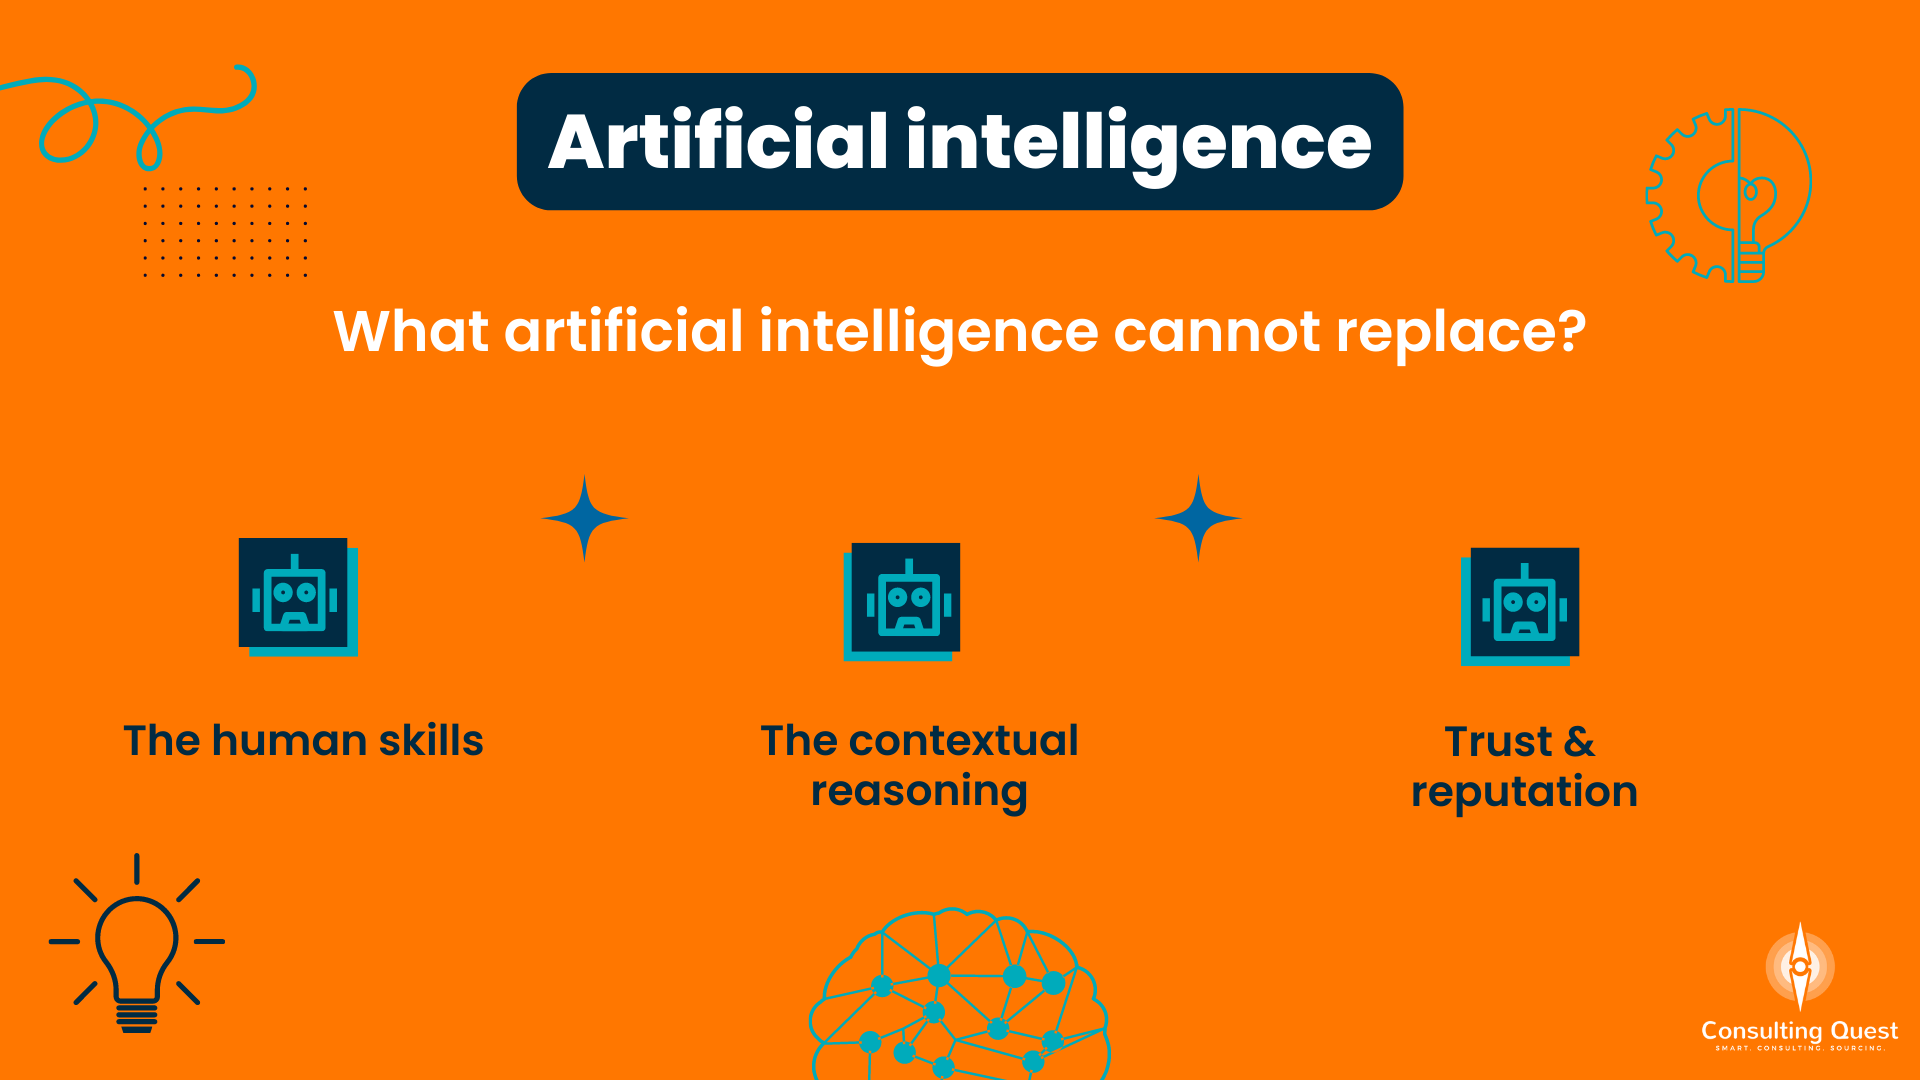 What AI cannot replace